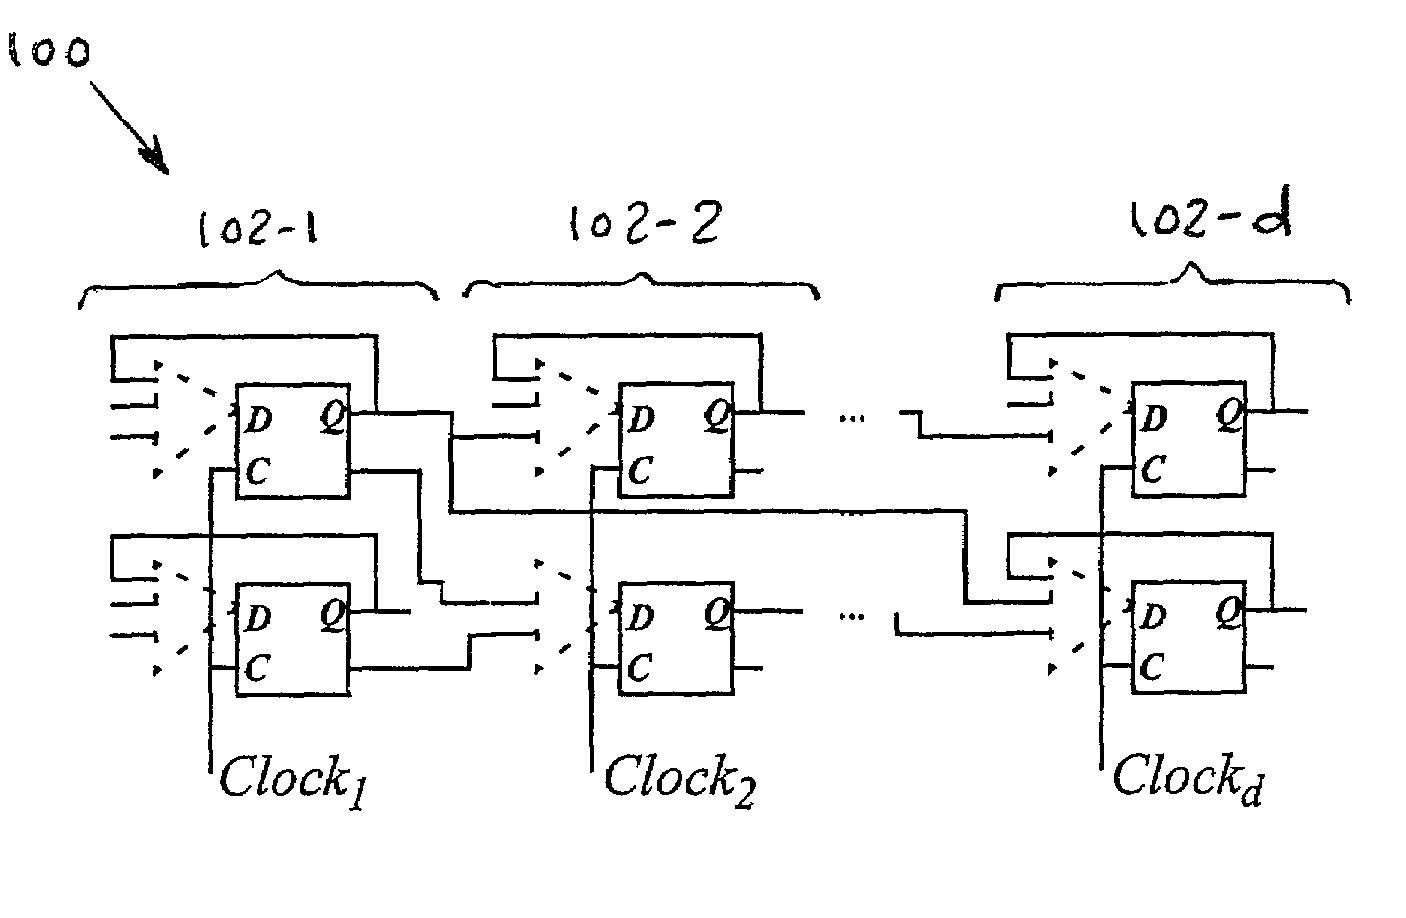 Sequential test pattern generation using clock-control design for testability structures